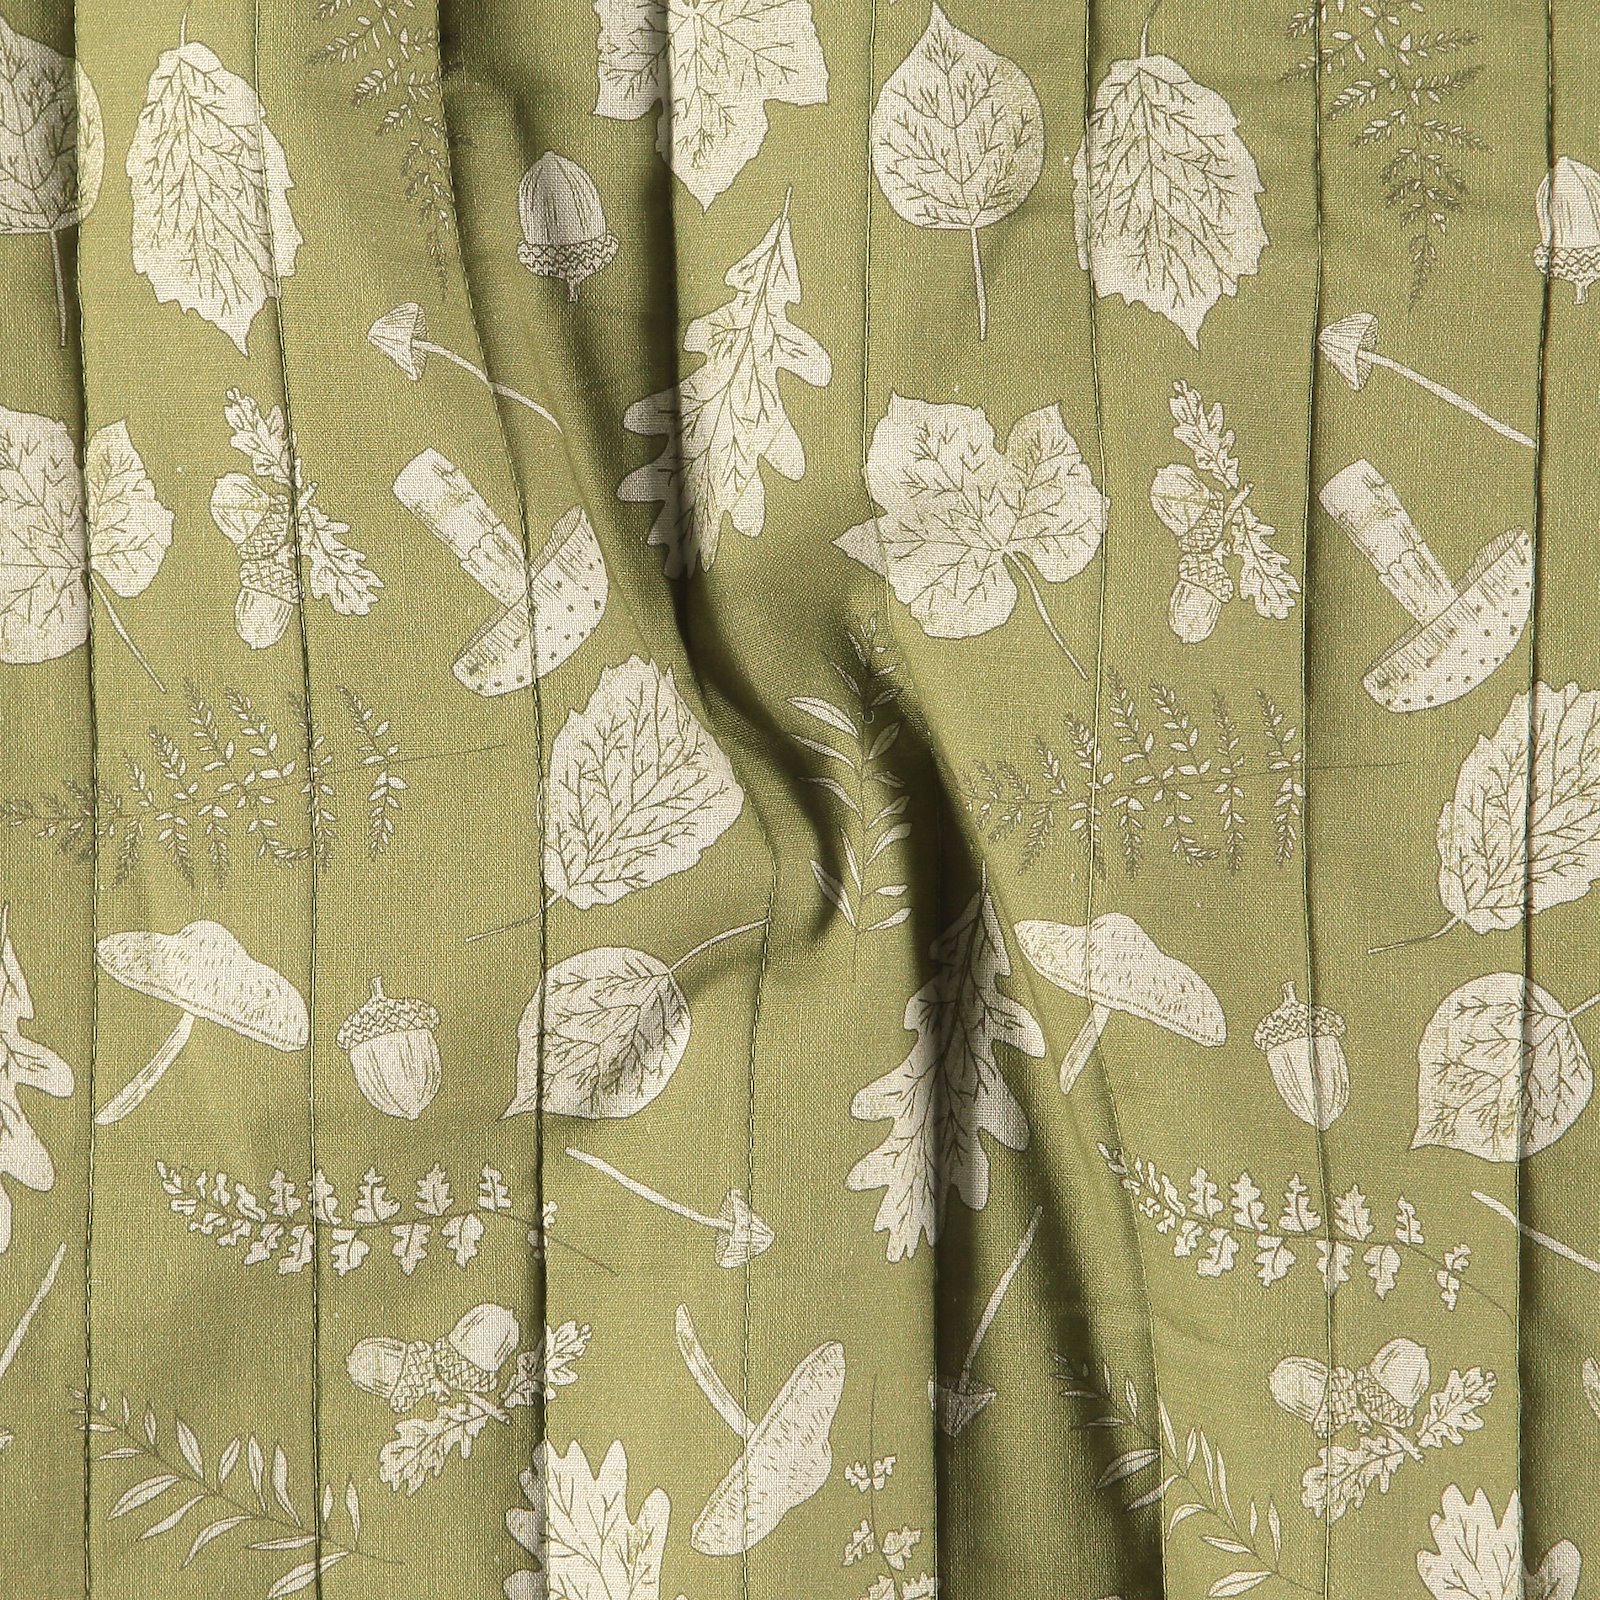 Woven quilt olive green w leafs 2-sided 920258_pack